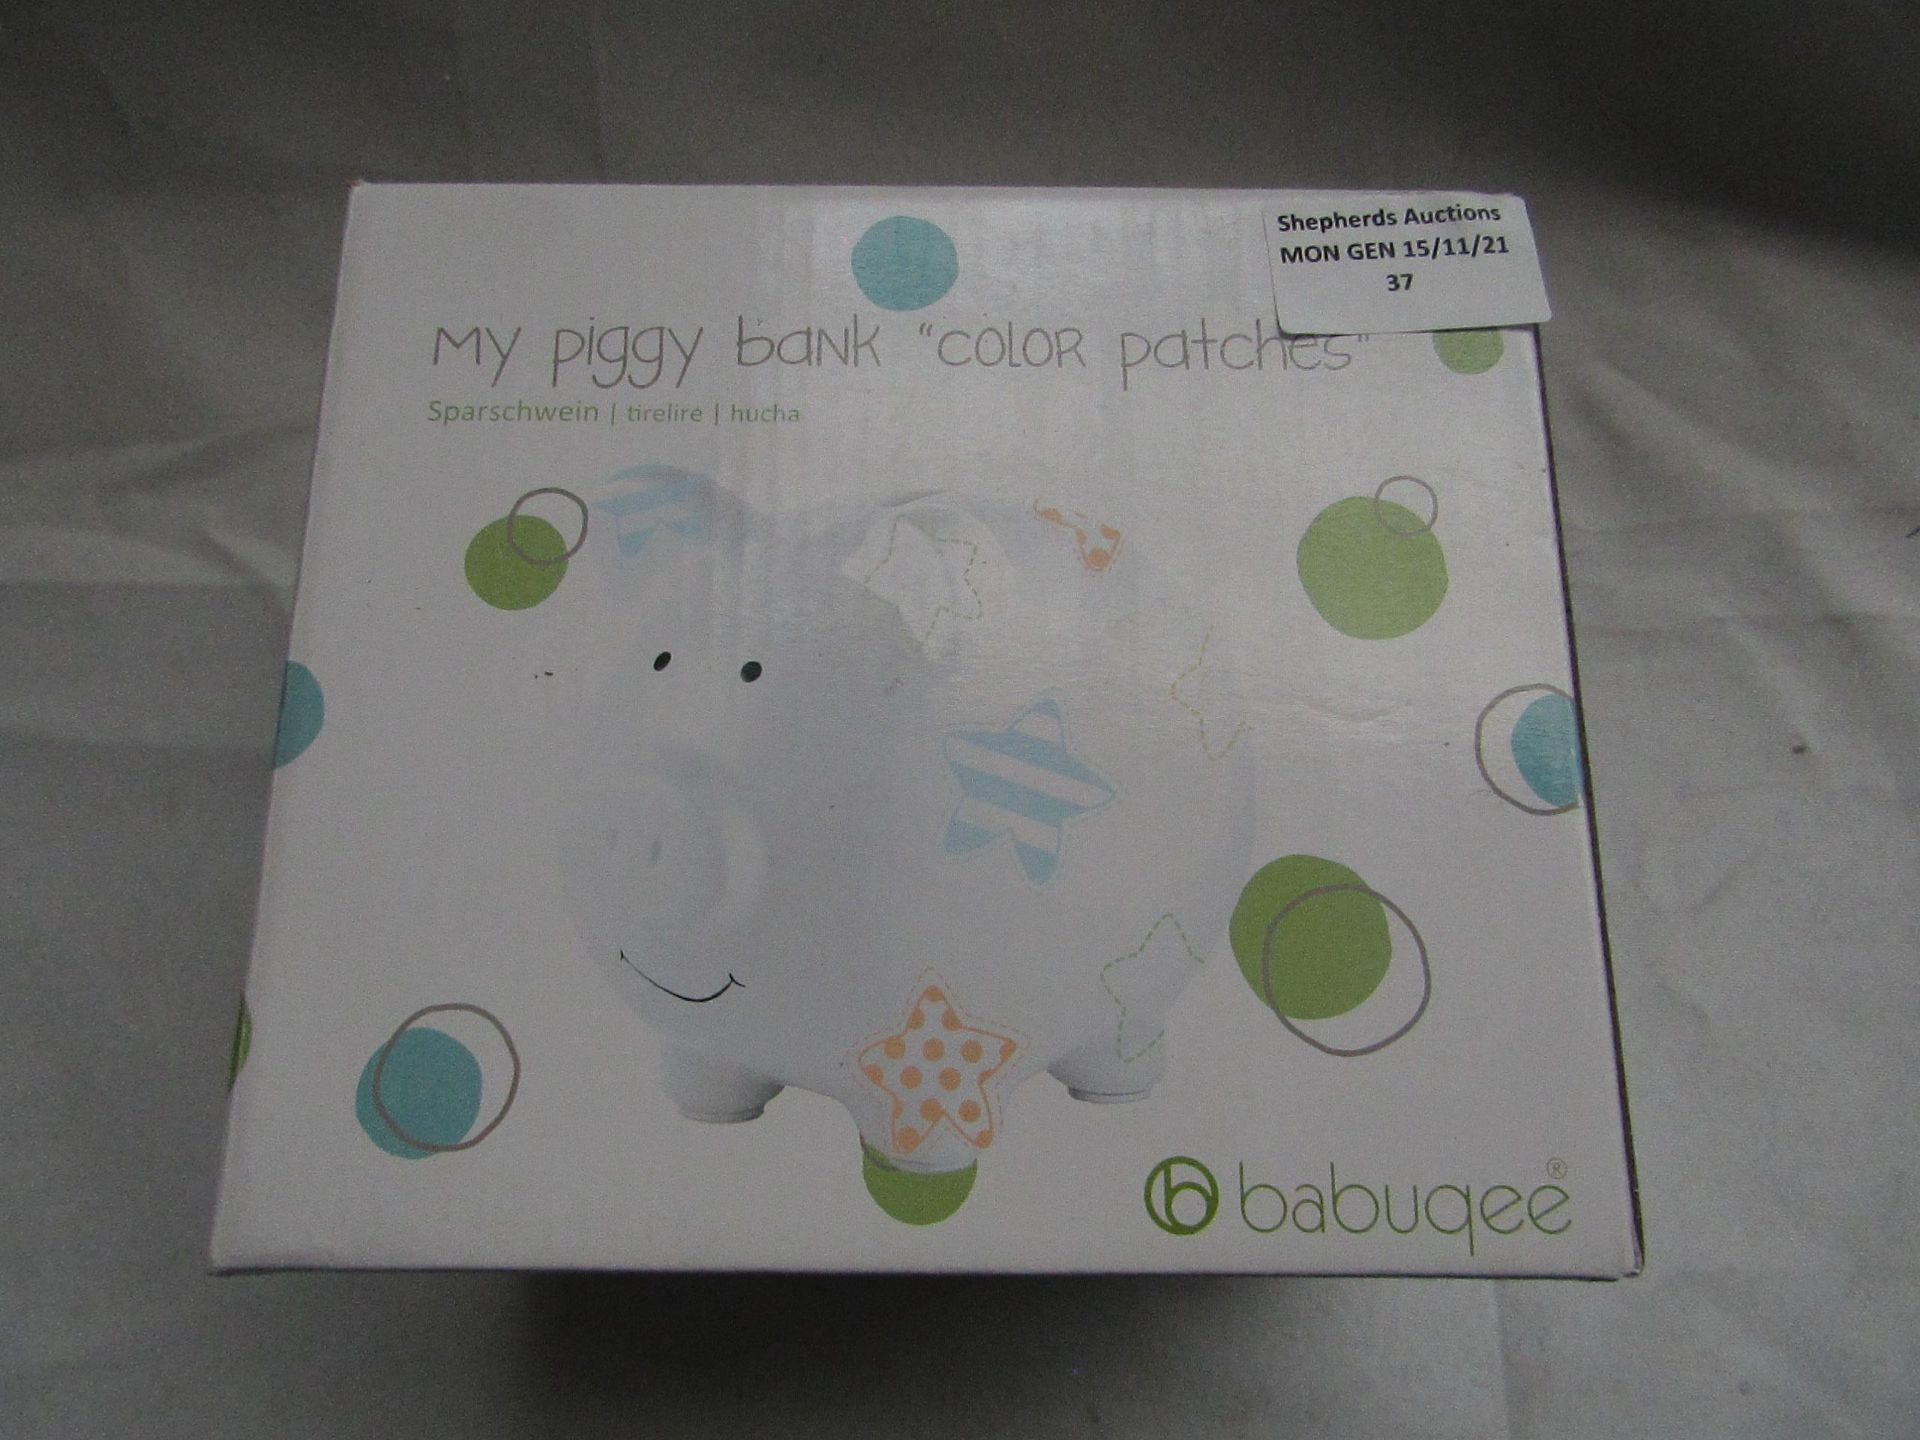 Babuqee - "Colour Patches" Piggy Bank - Unused & Boxed.